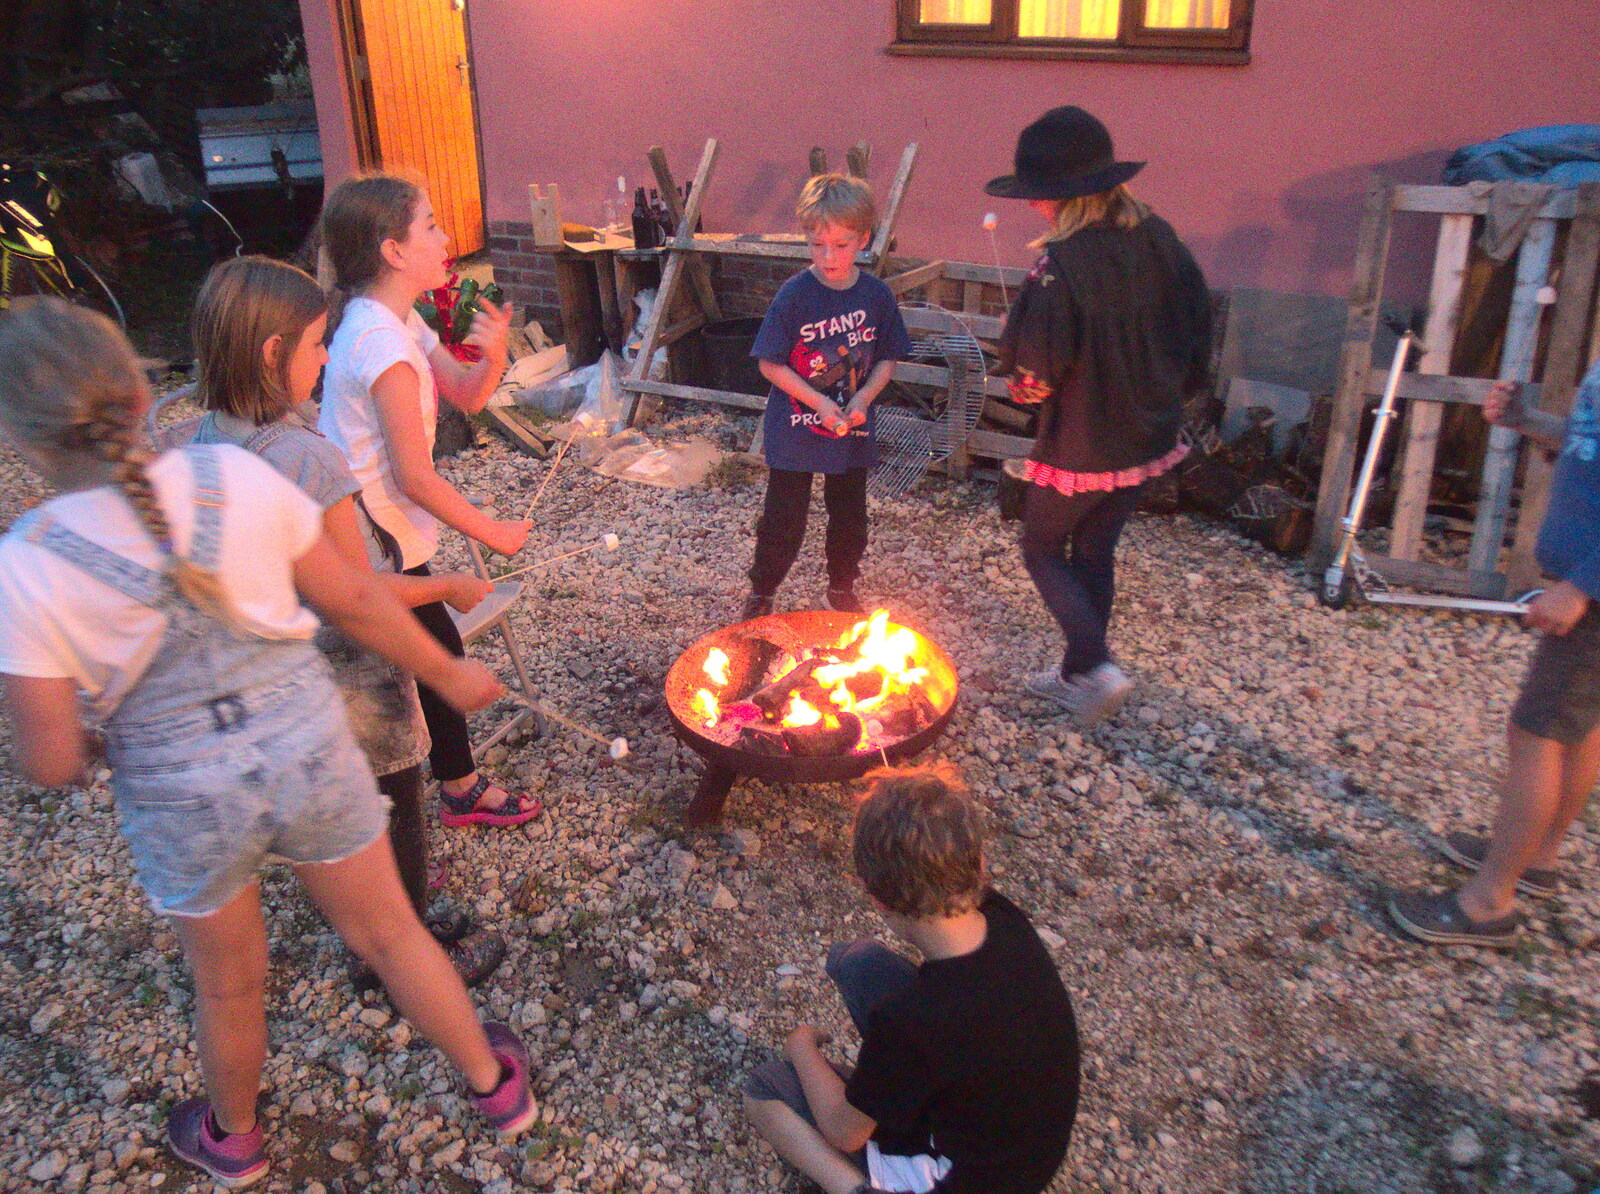 The fire pit is going from A Summer Party, Brome, Suffolk - 18th August 2018